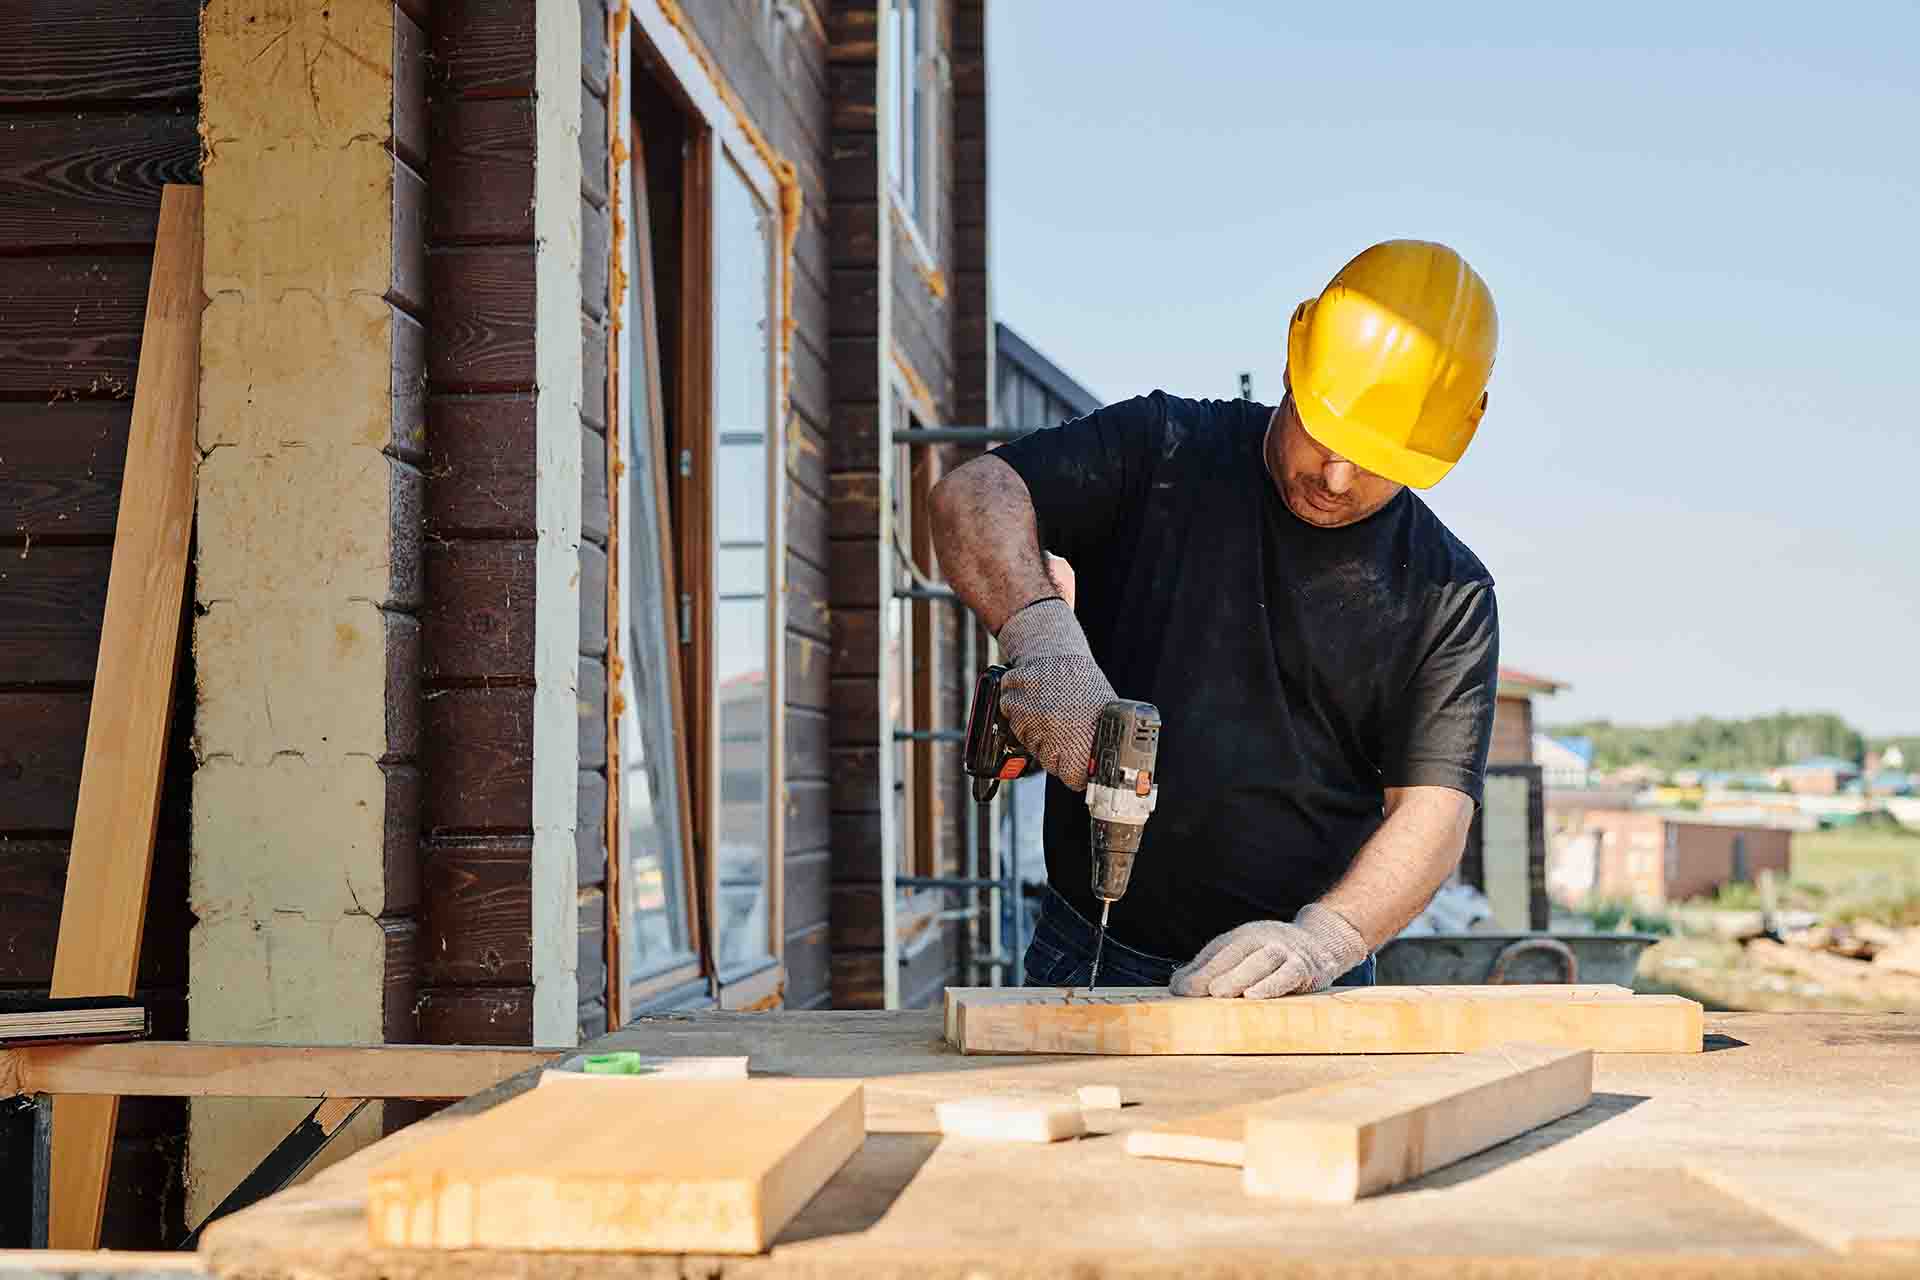 A man wearing a construction hat and using a power drill on wood parts outside of a home under construction.